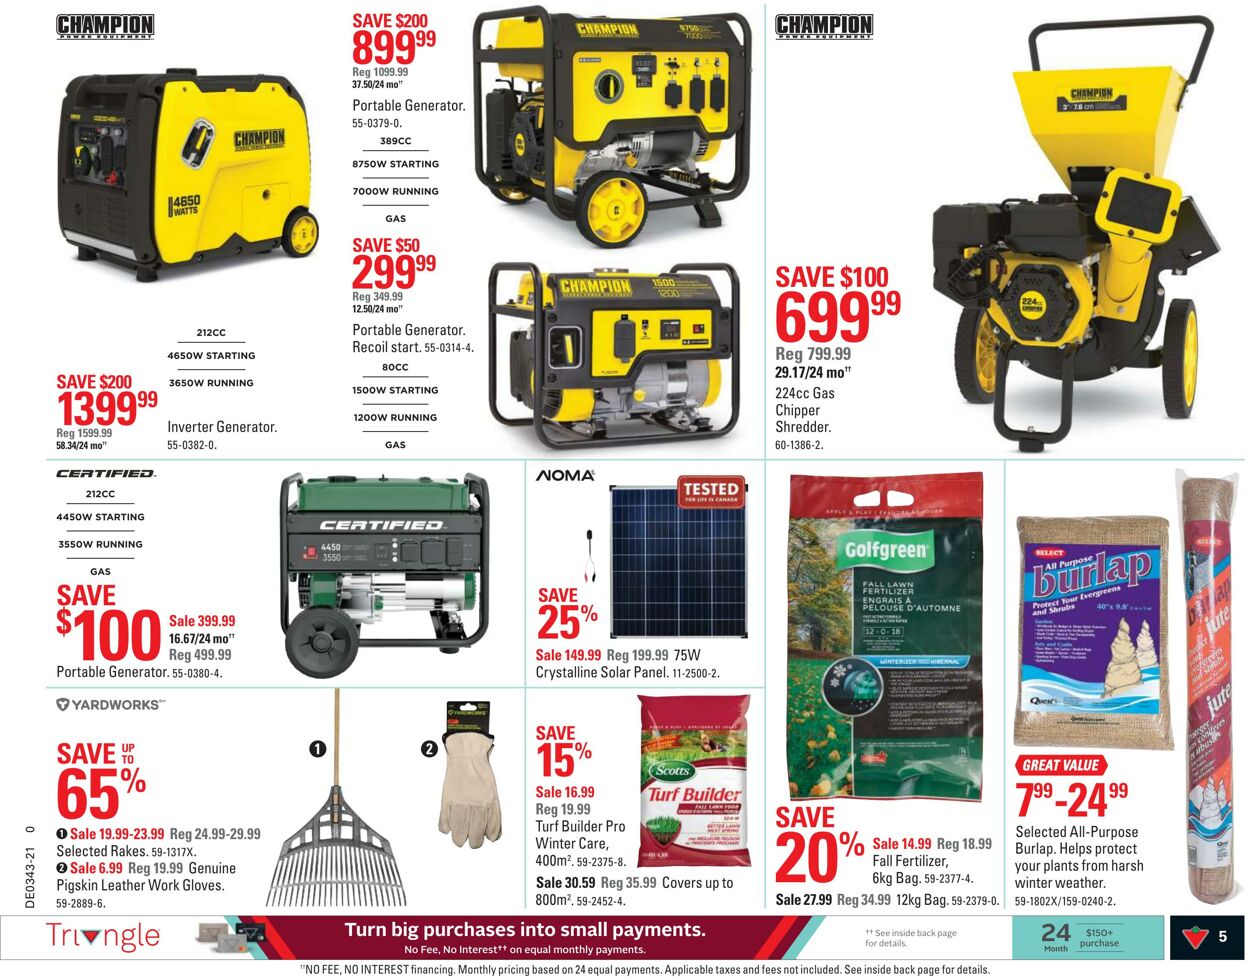 Flyer Canadian Tire 21.10.2021 - 27.10.2021